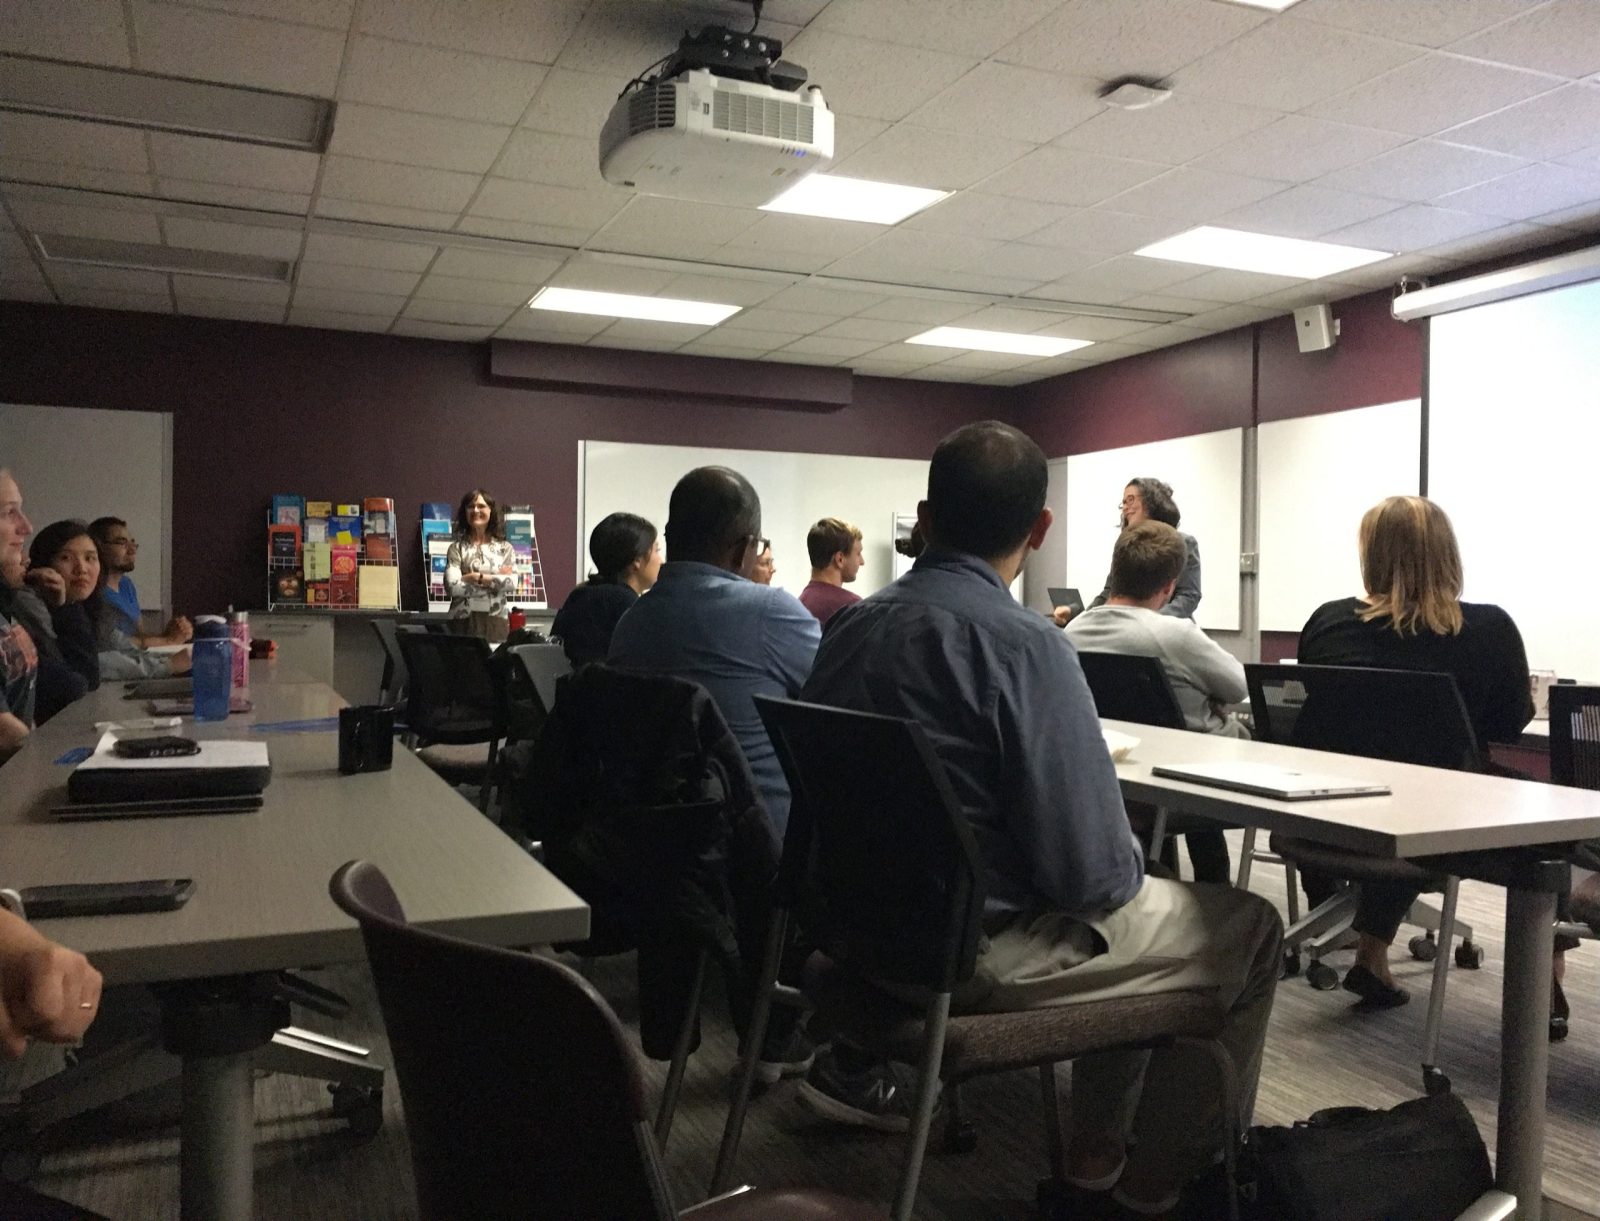 More photos from Dr. Levys' talk on October 22nd